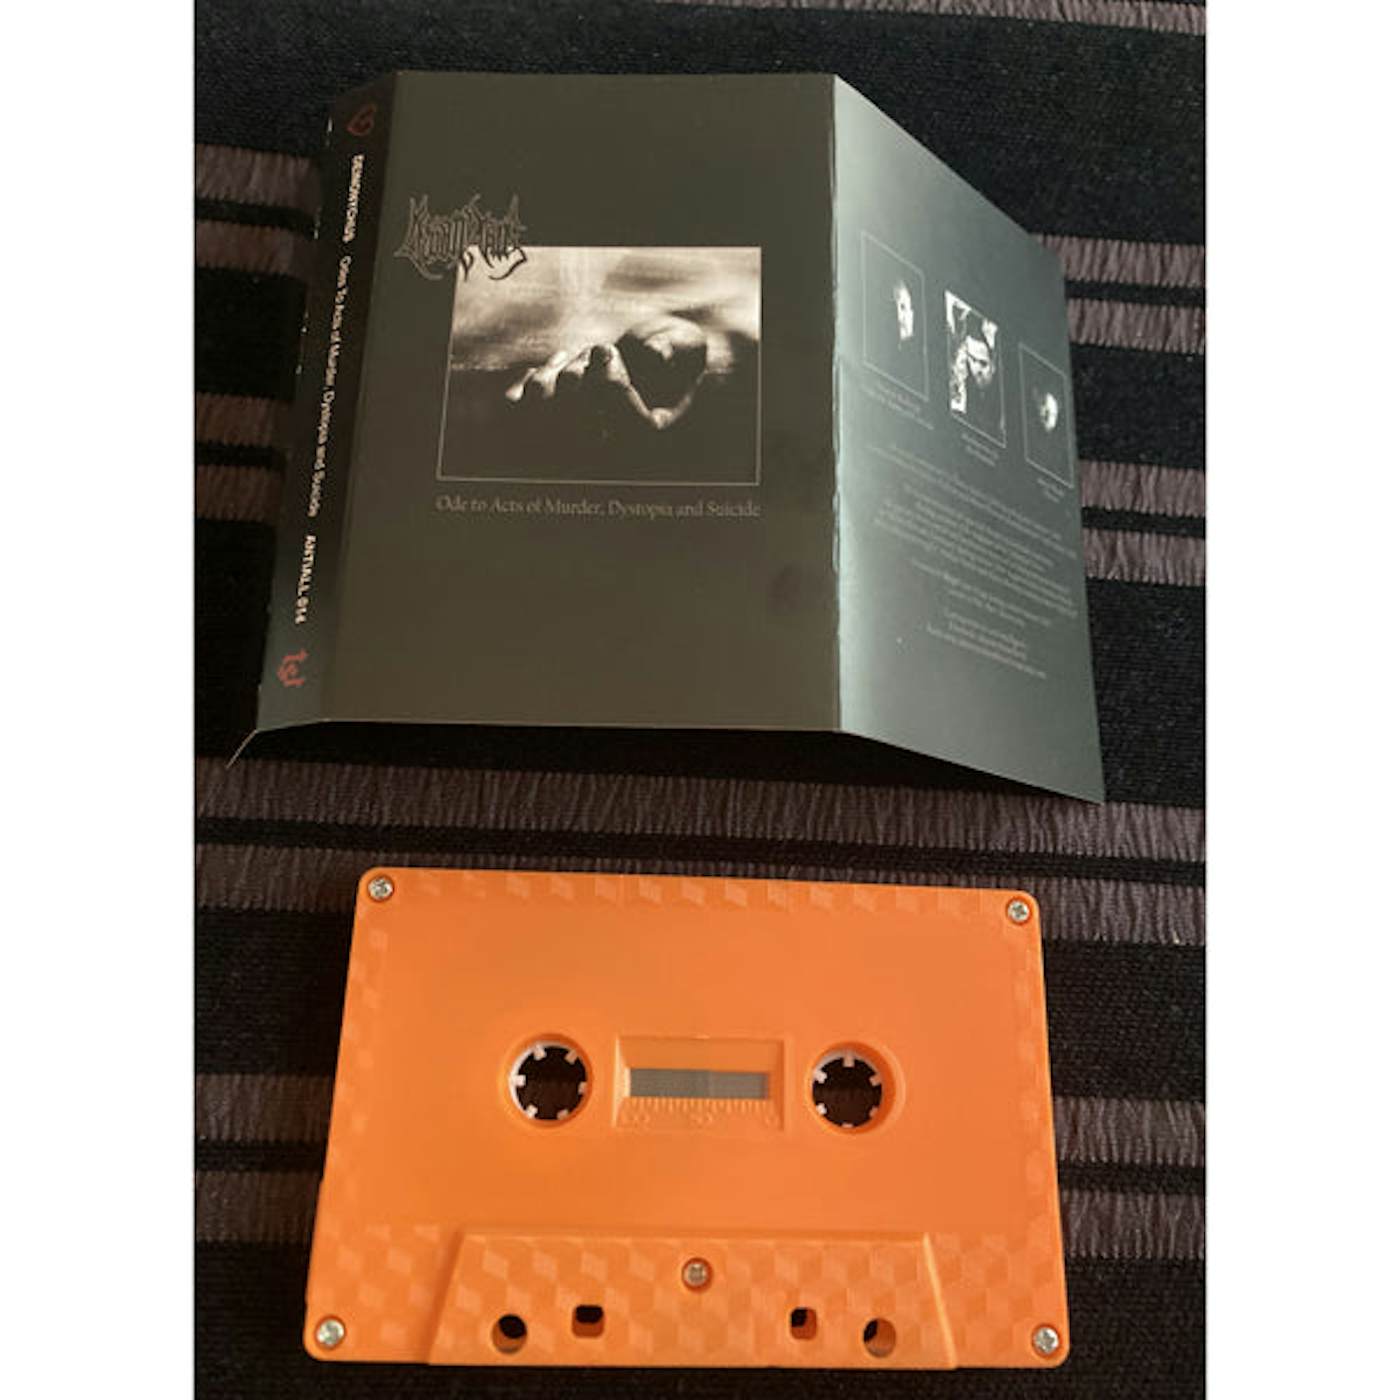 Deinonychus Music Cassette - Ode To Acts Of Murder, Dystopia And Suicide